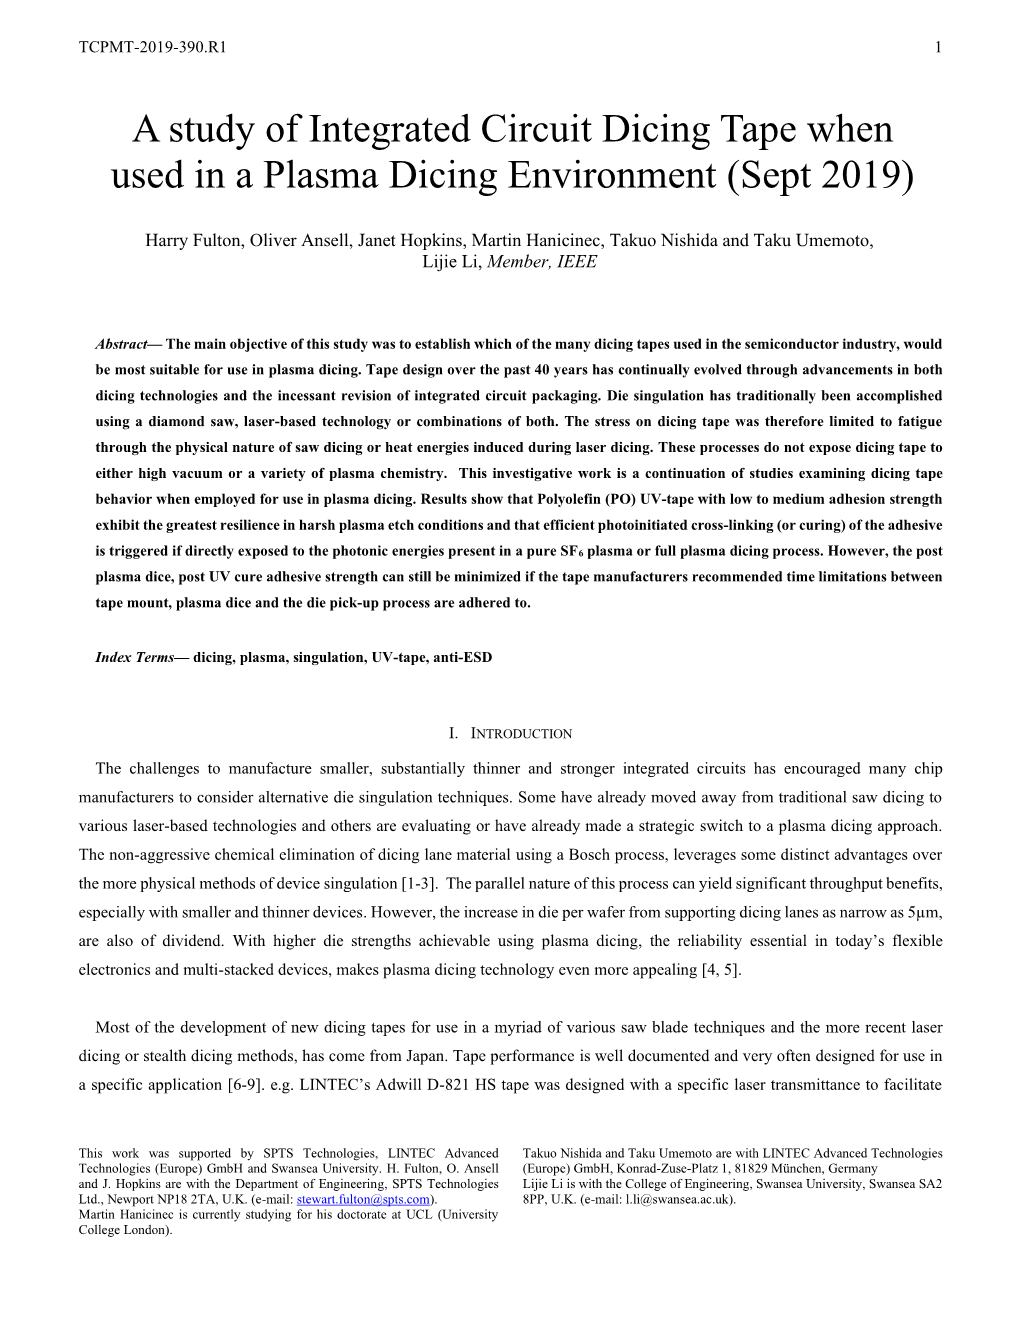 A Study of Integrated Circuit Dicing Tape When Used in a Plasma Dicing Environment (Sept 2019)